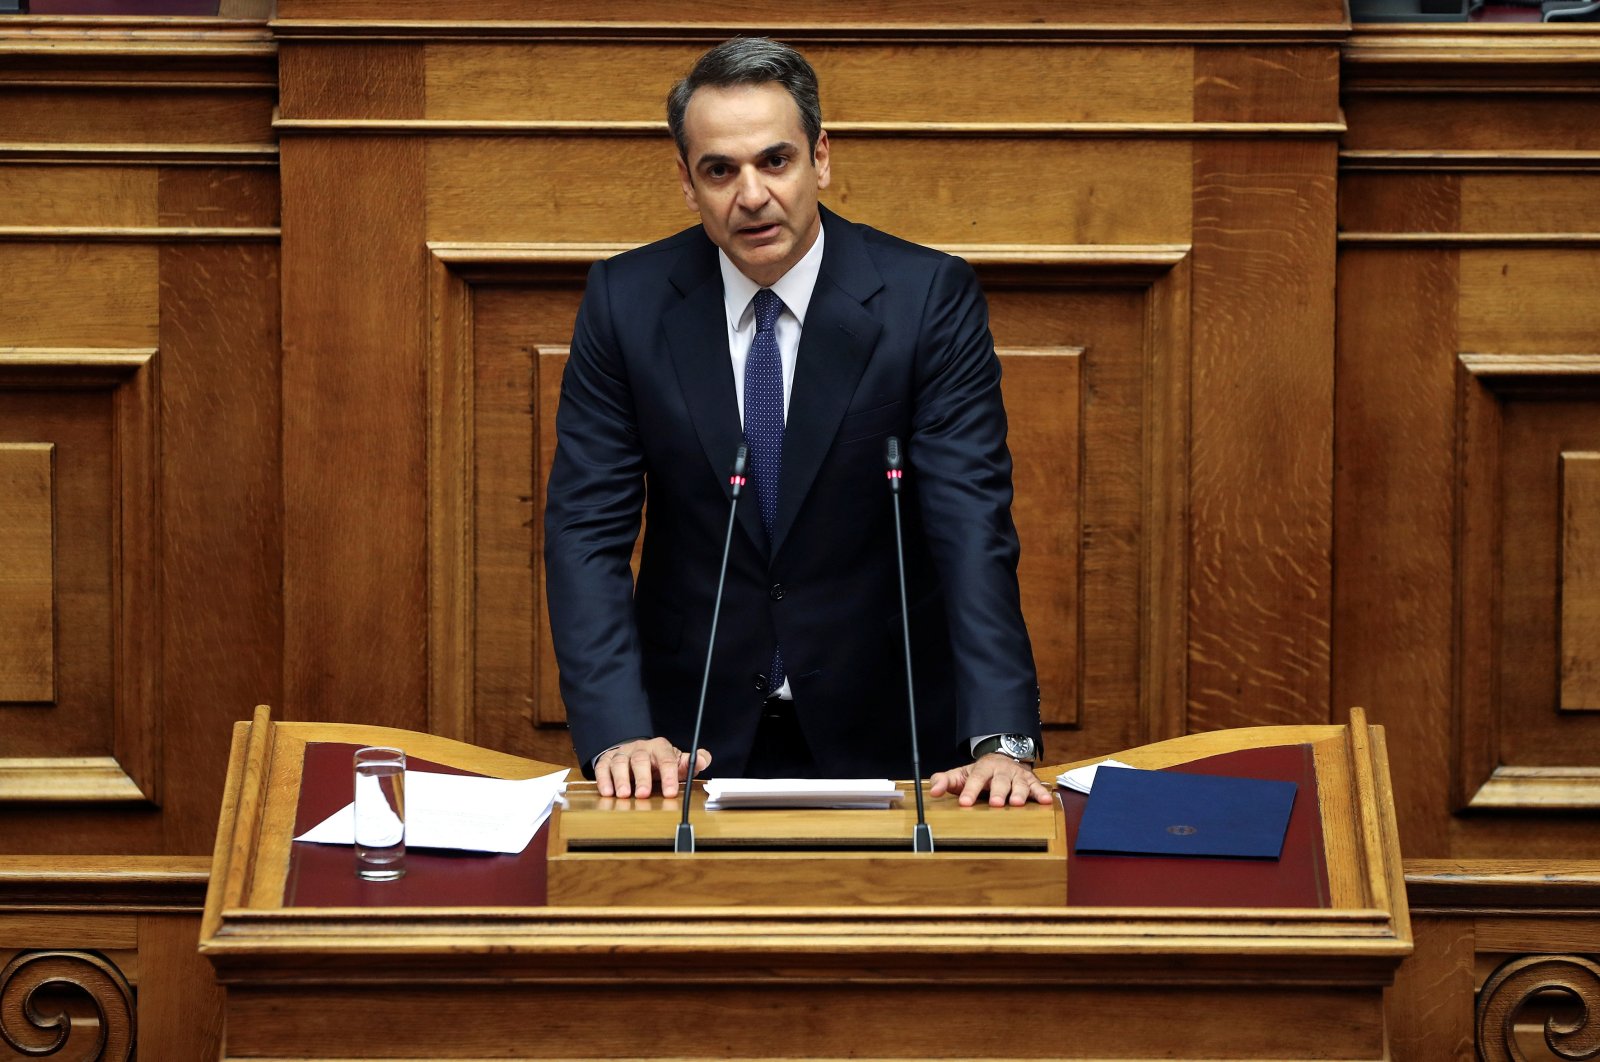 Greek Prime Minister Kyriakos Mitsotakis presents his government's main policies during a parliamentary session in Athens, Greece, July 20, 2019. (Reuters Photo)